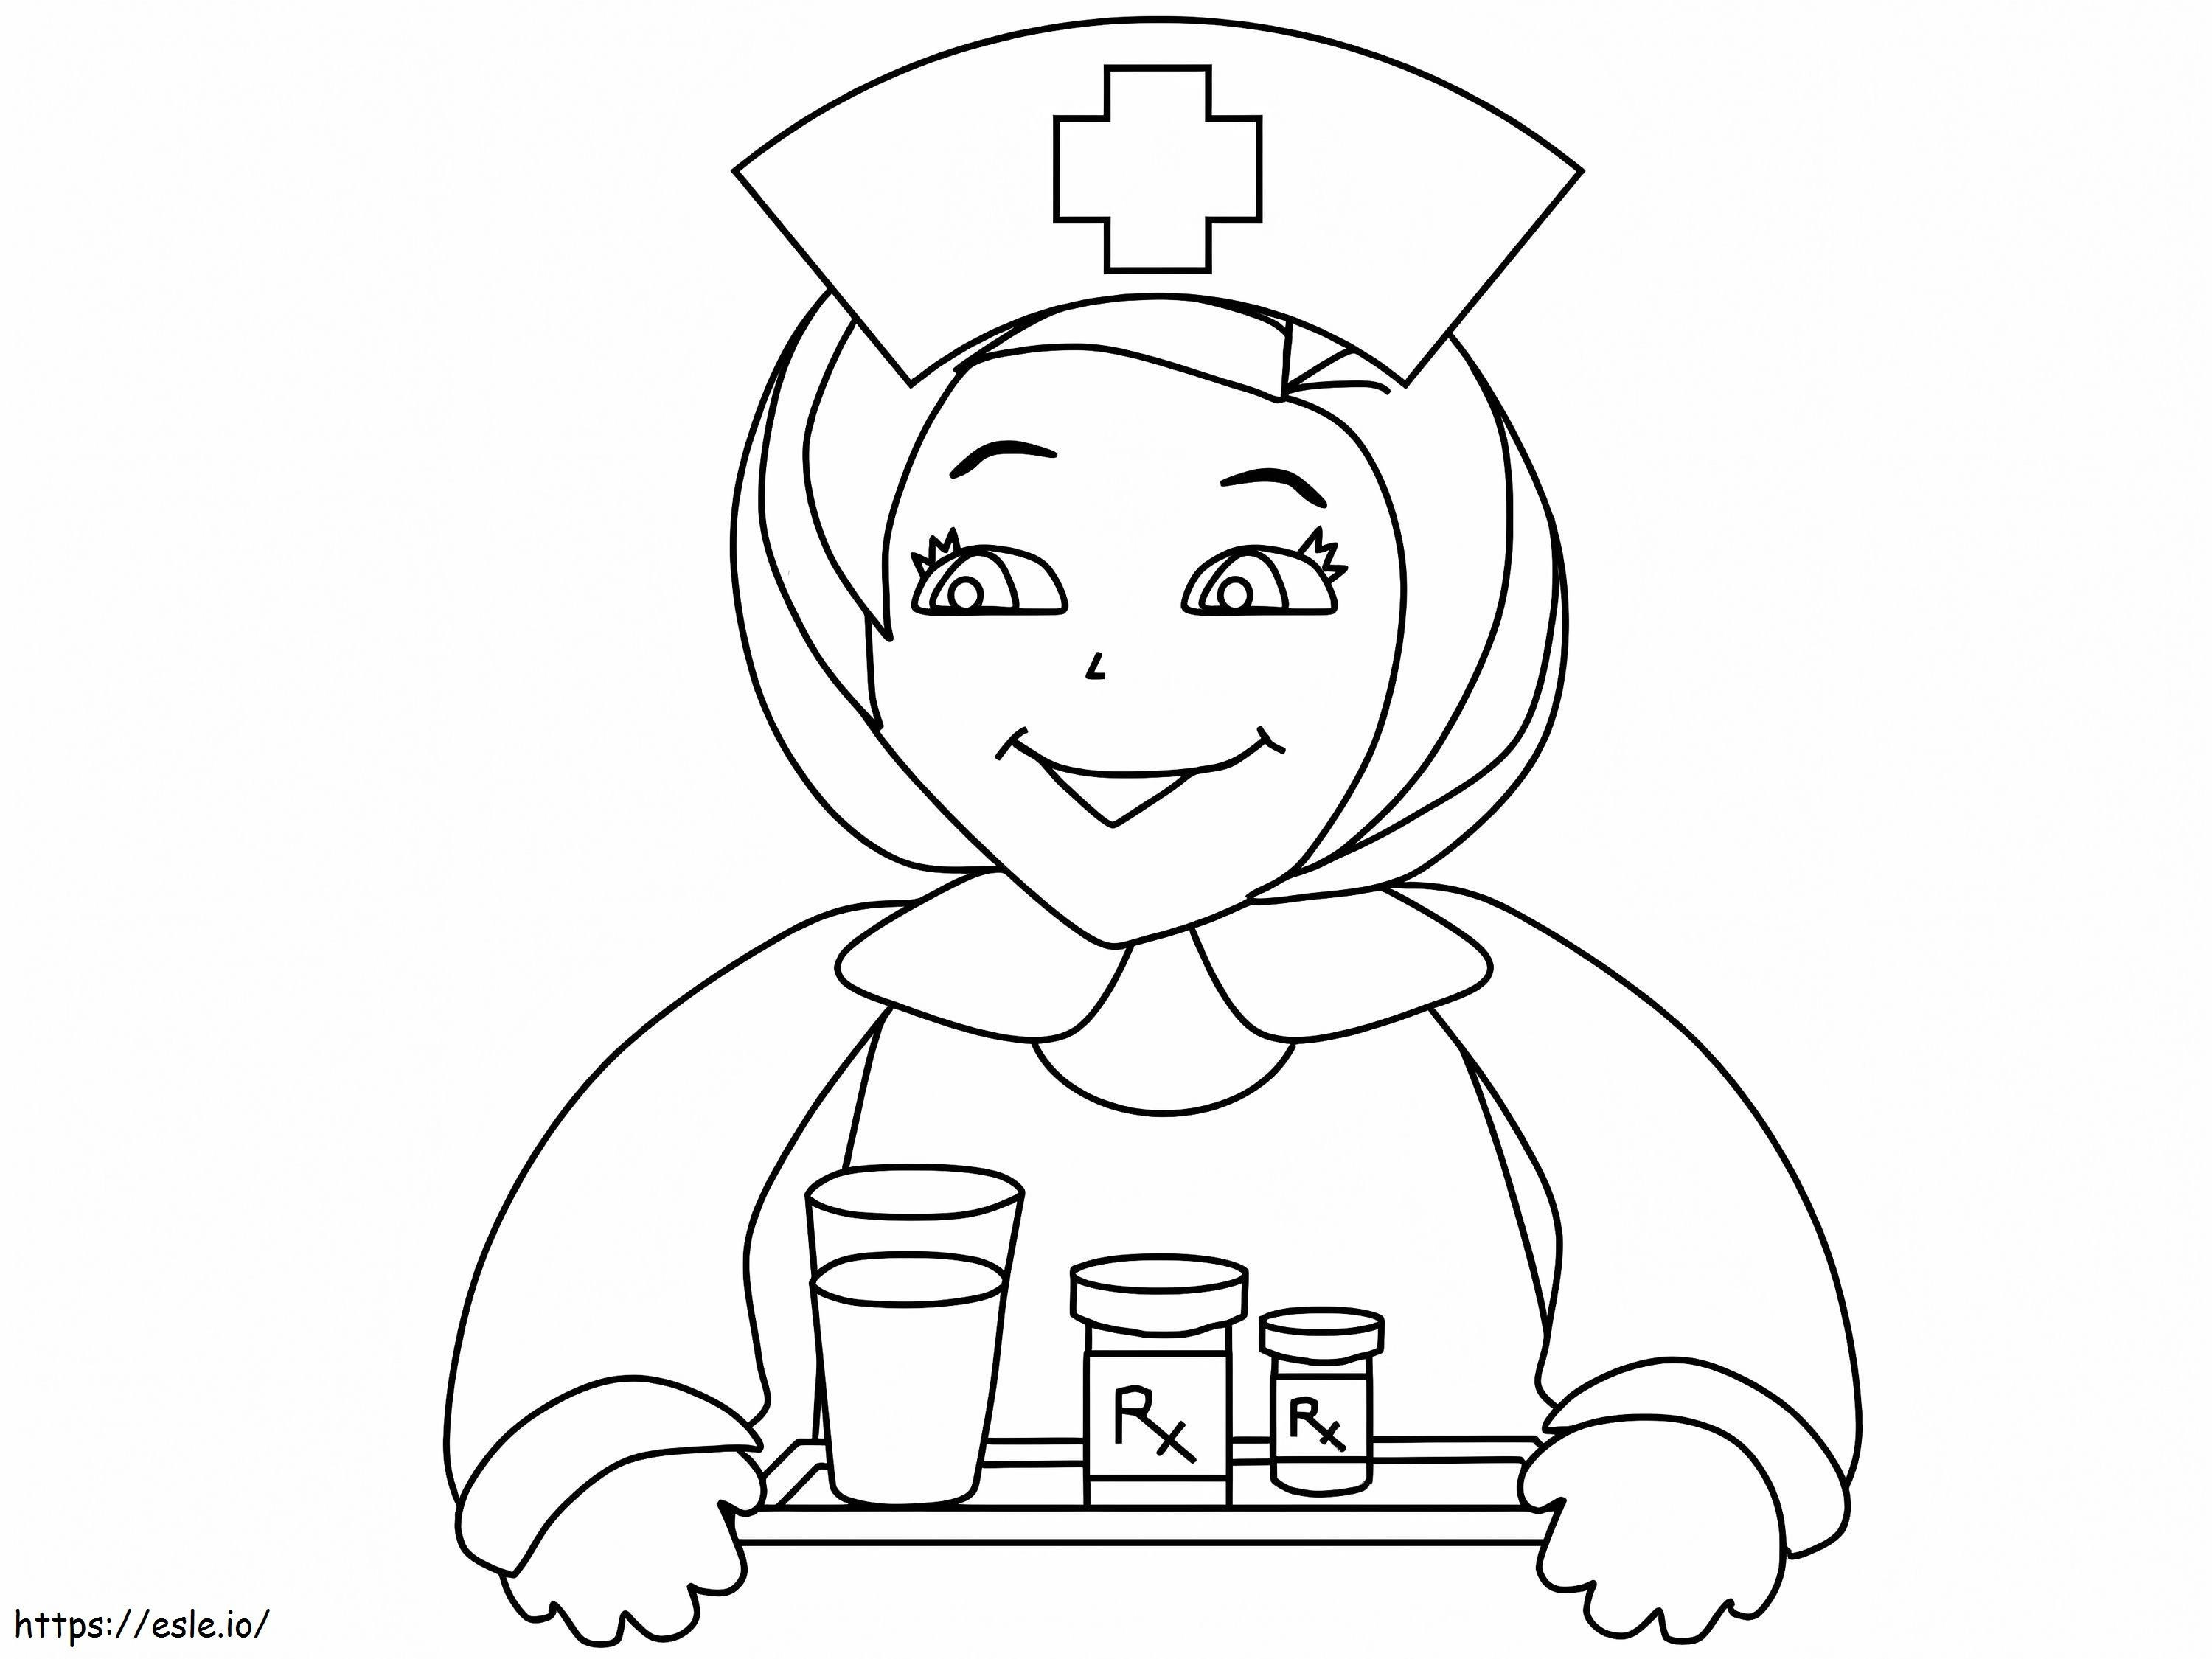 Nurse Is Smiling coloring page